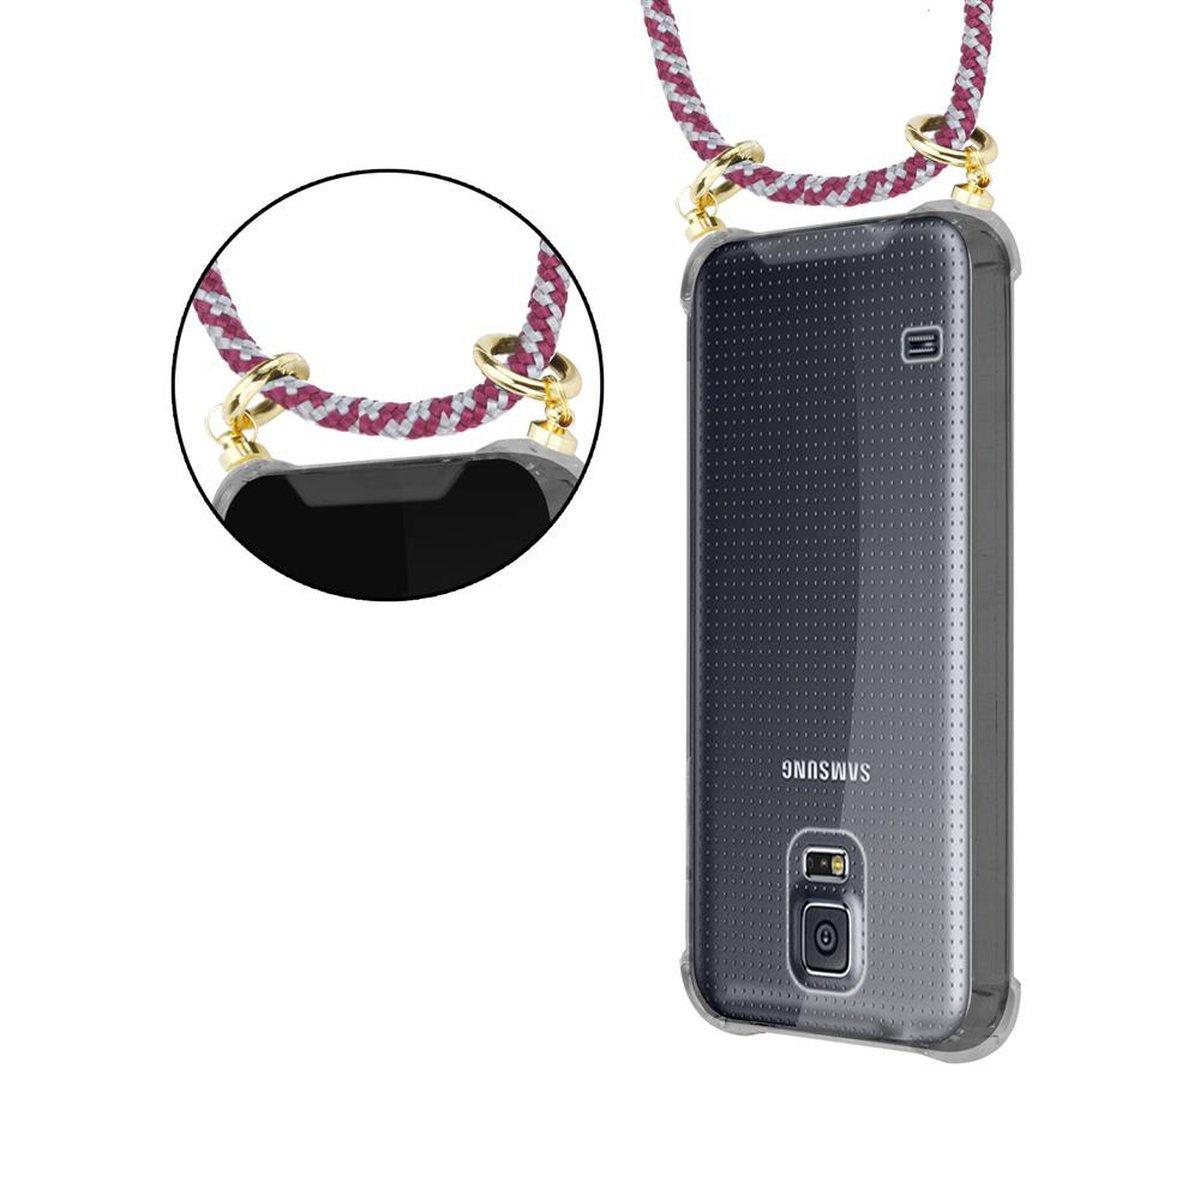 Ringen, S5 S5 Band ROT NEO, Backcover, / Gold Samsung, Kette Handy abnehmbarer mit Hülle, Galaxy CADORABO Kordel und WEIß